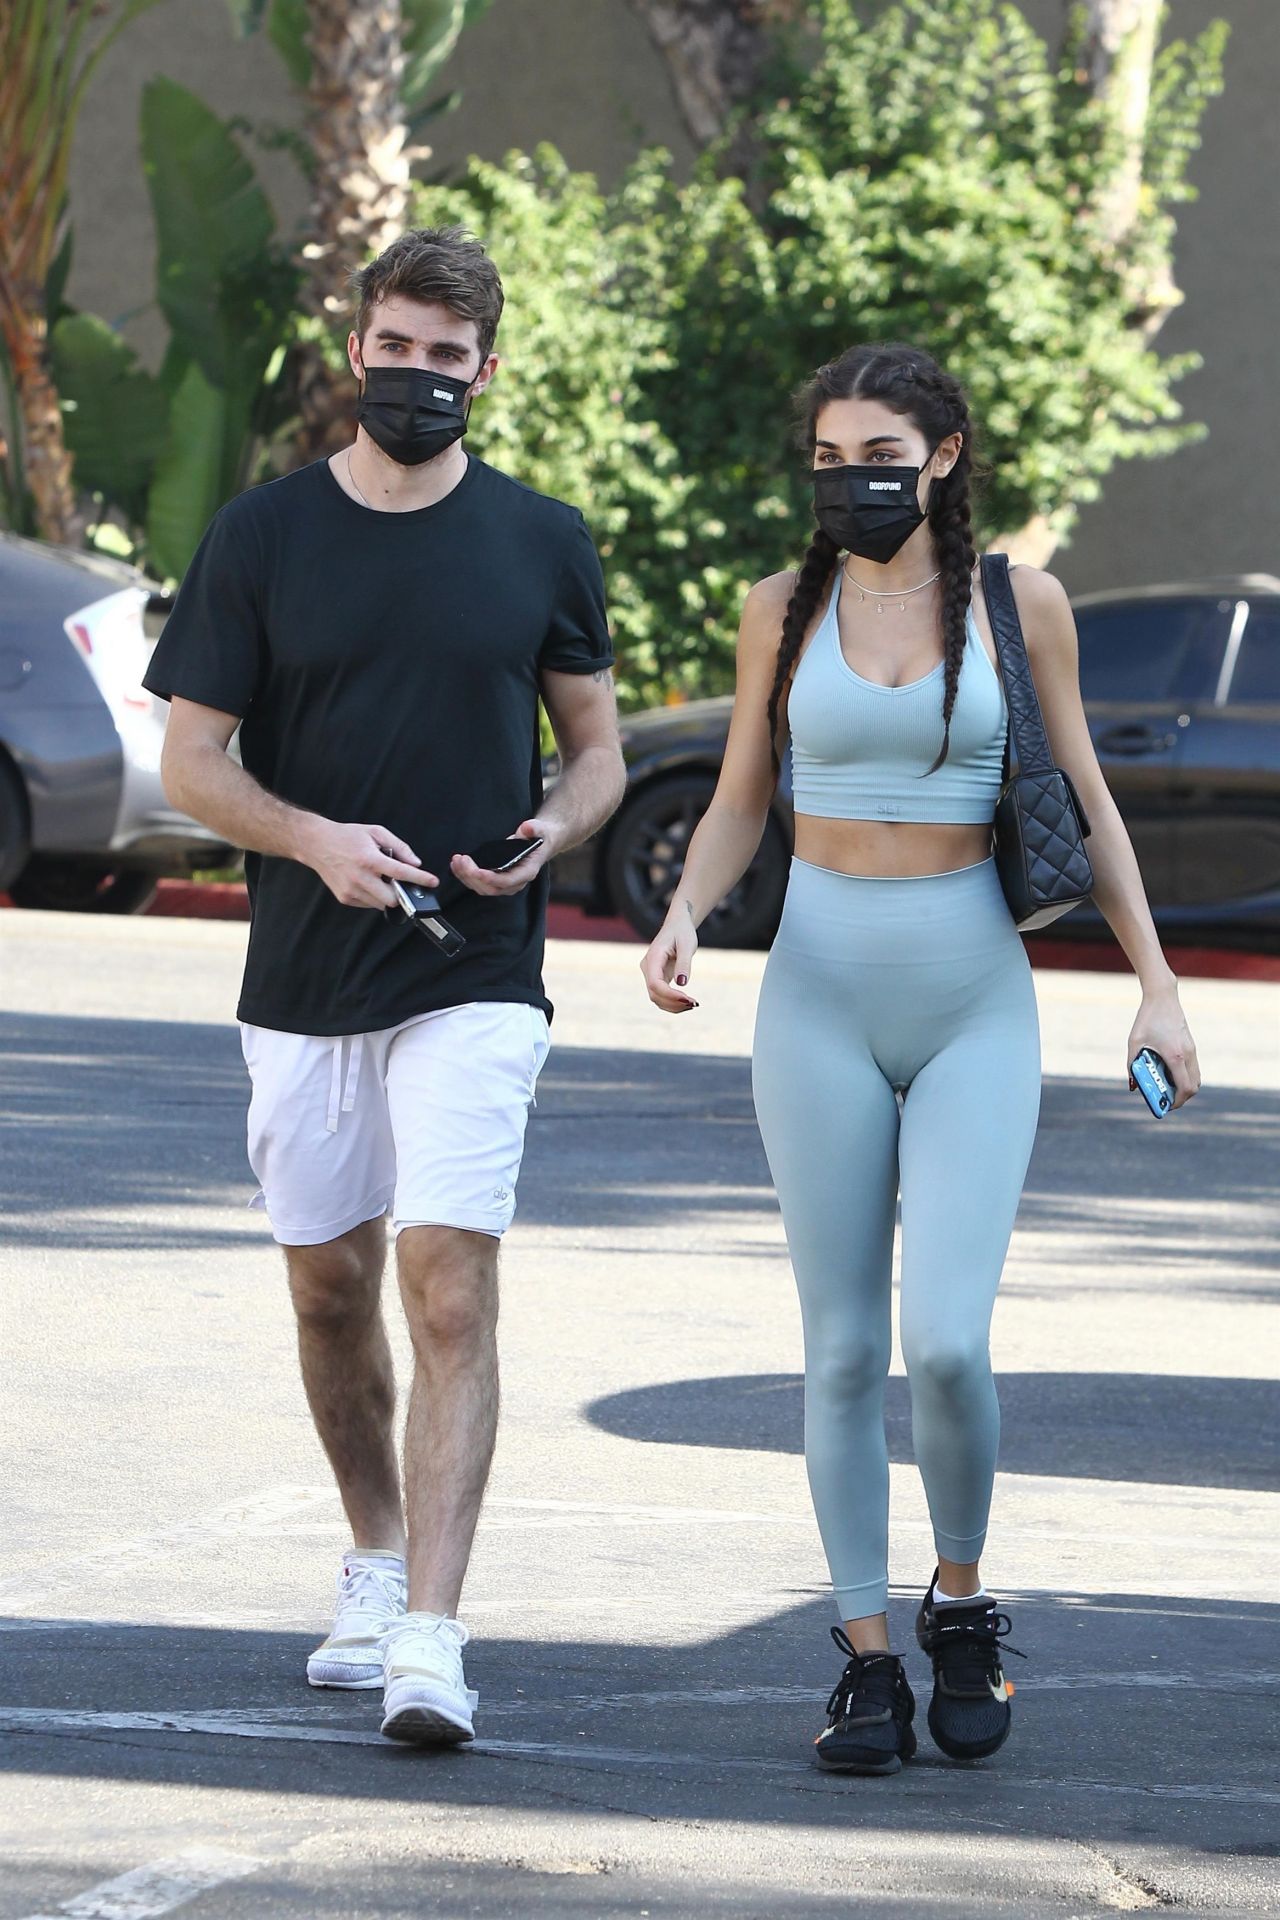 https://celebmafia.com/wp-content/uploads/2020/11/chantel-jeffries-and-andrew-taggart-out-in-la-11-18-2020-[1-31].jpg